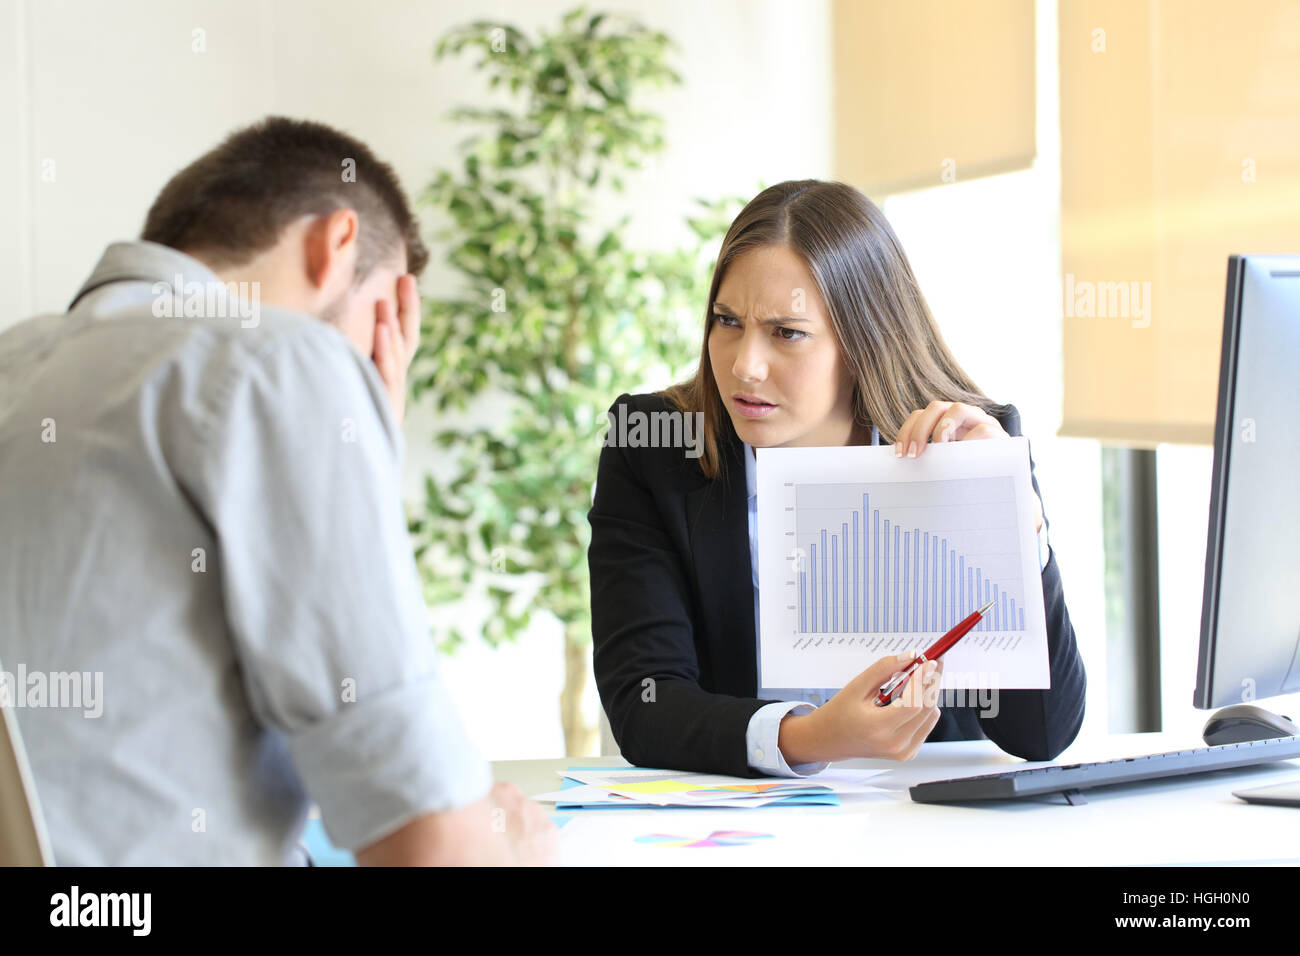 Angry boss showing a growth graph with bad results and scolding to an employee Stock Photo